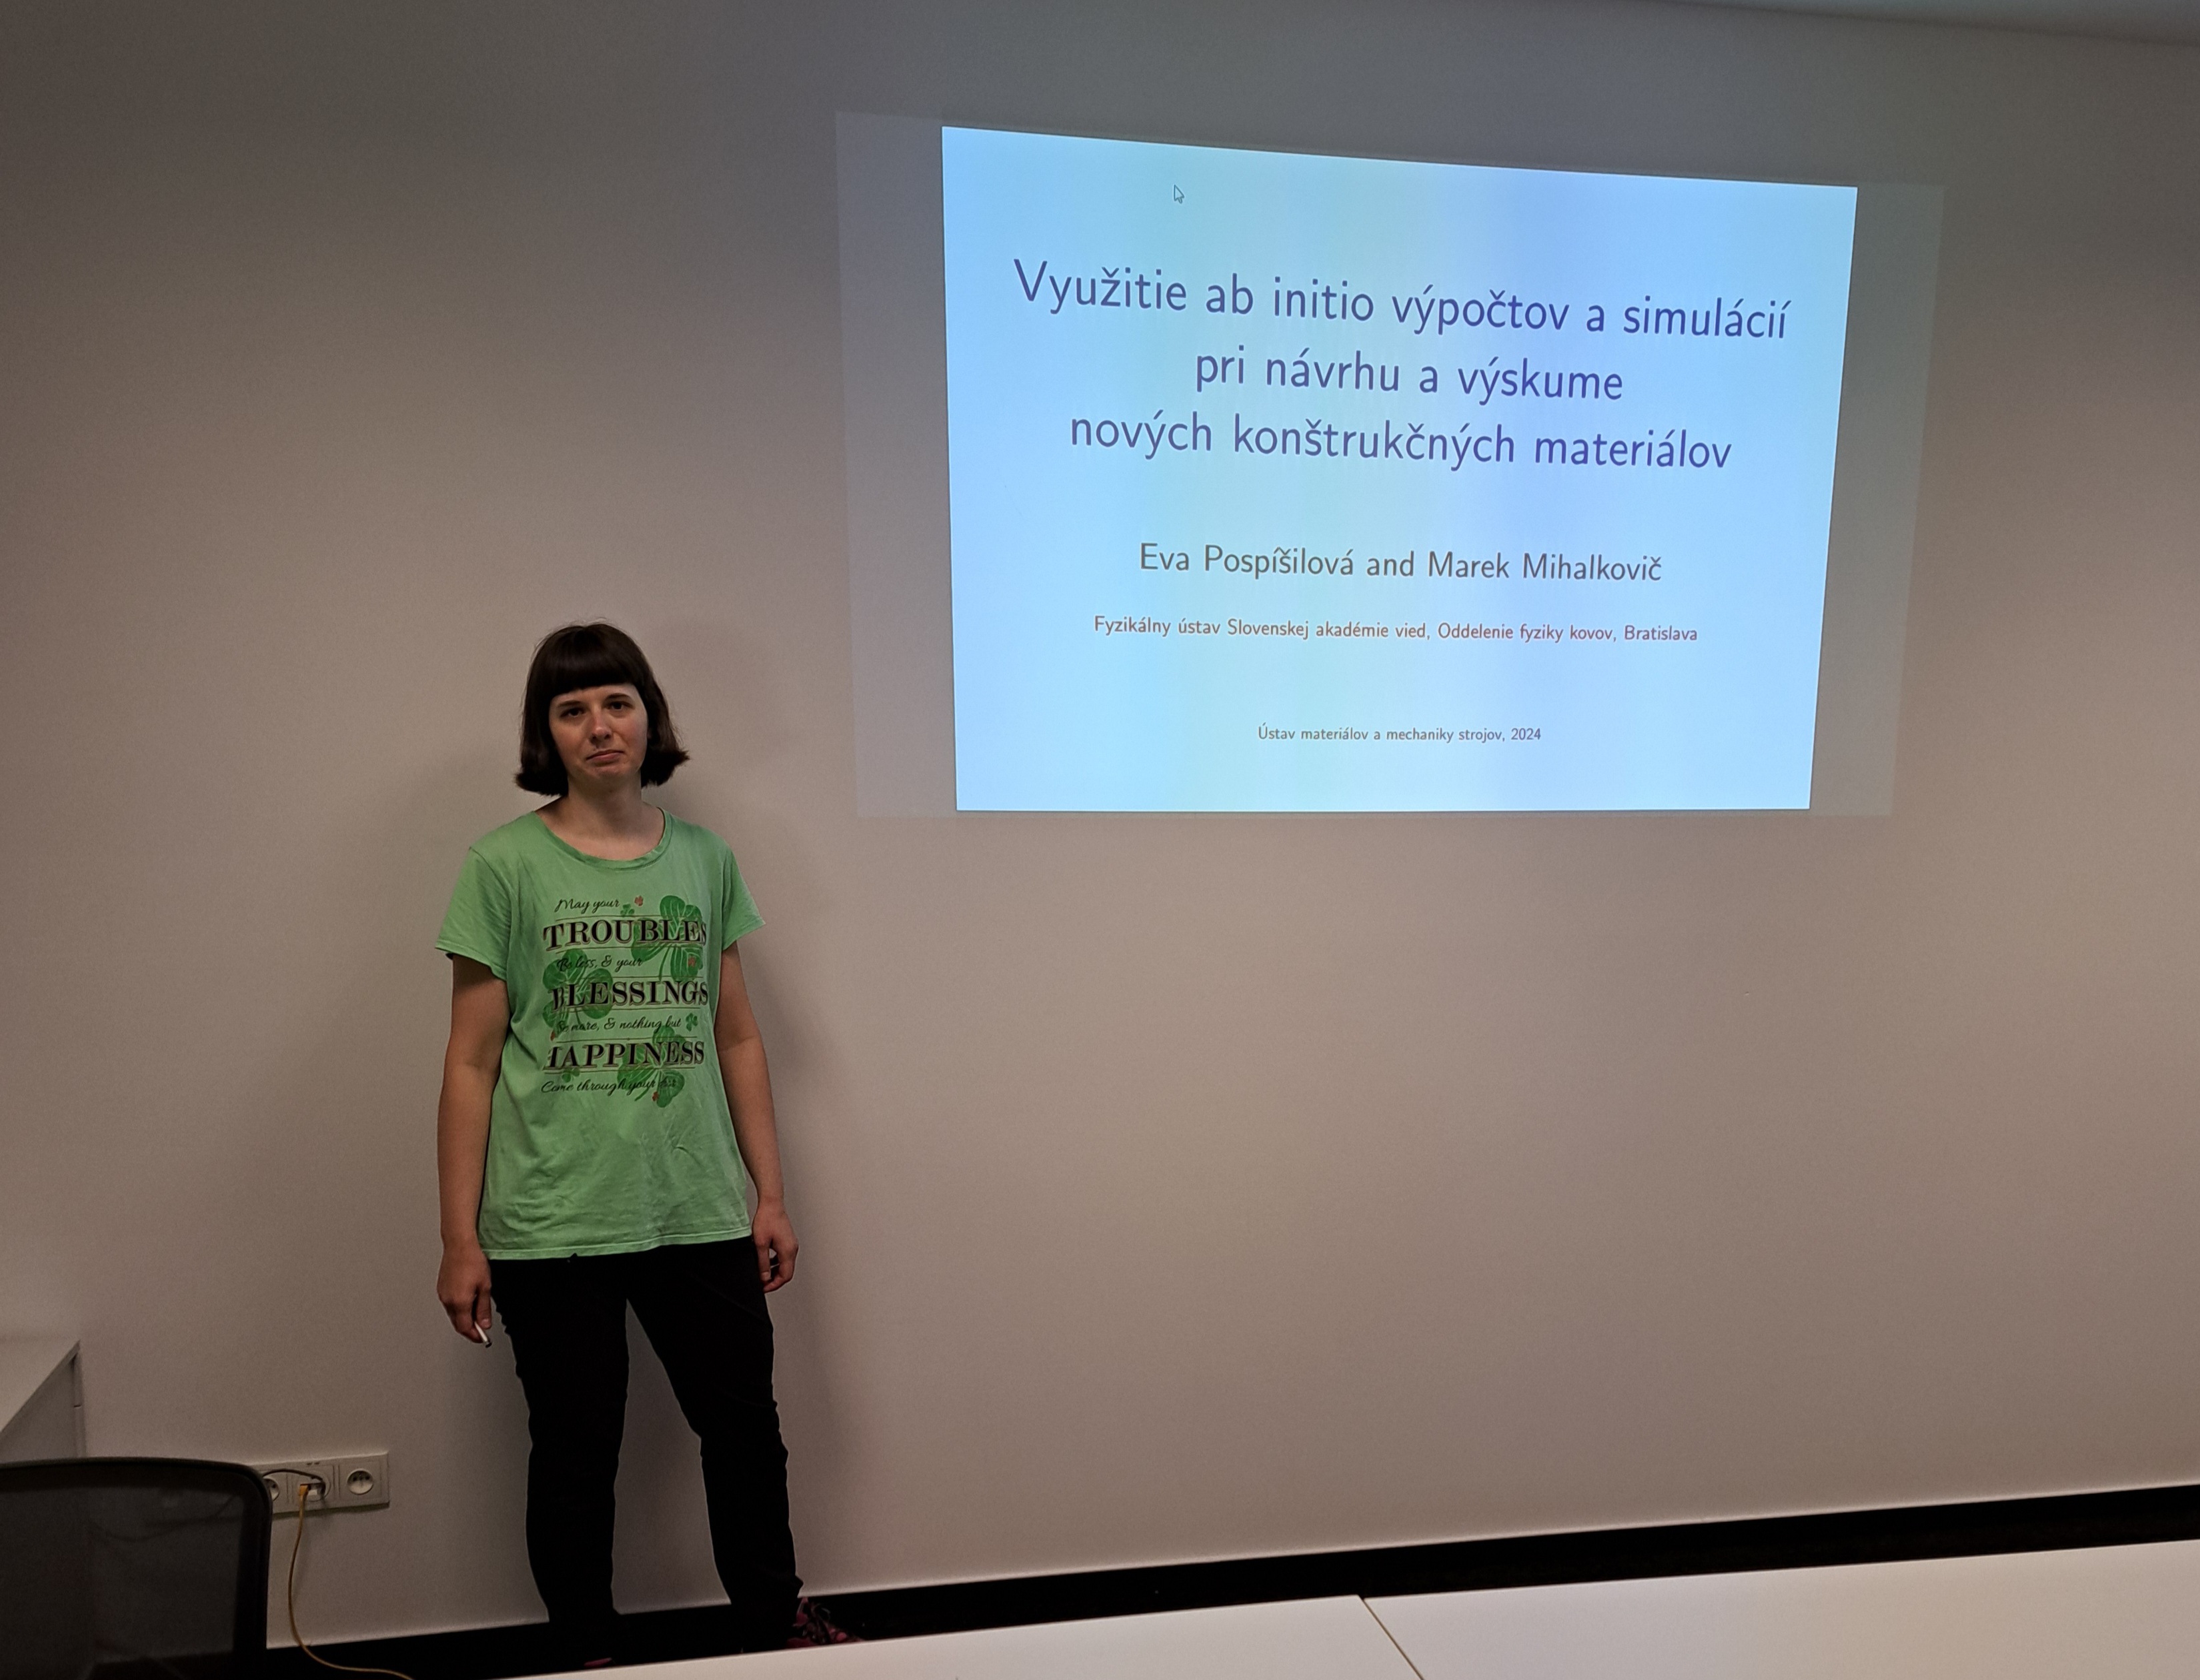 Internal seminar - Mgr. Eva Pospíšilová - "Use of ab initio calculations and simulations in the design and research of new structural materials"